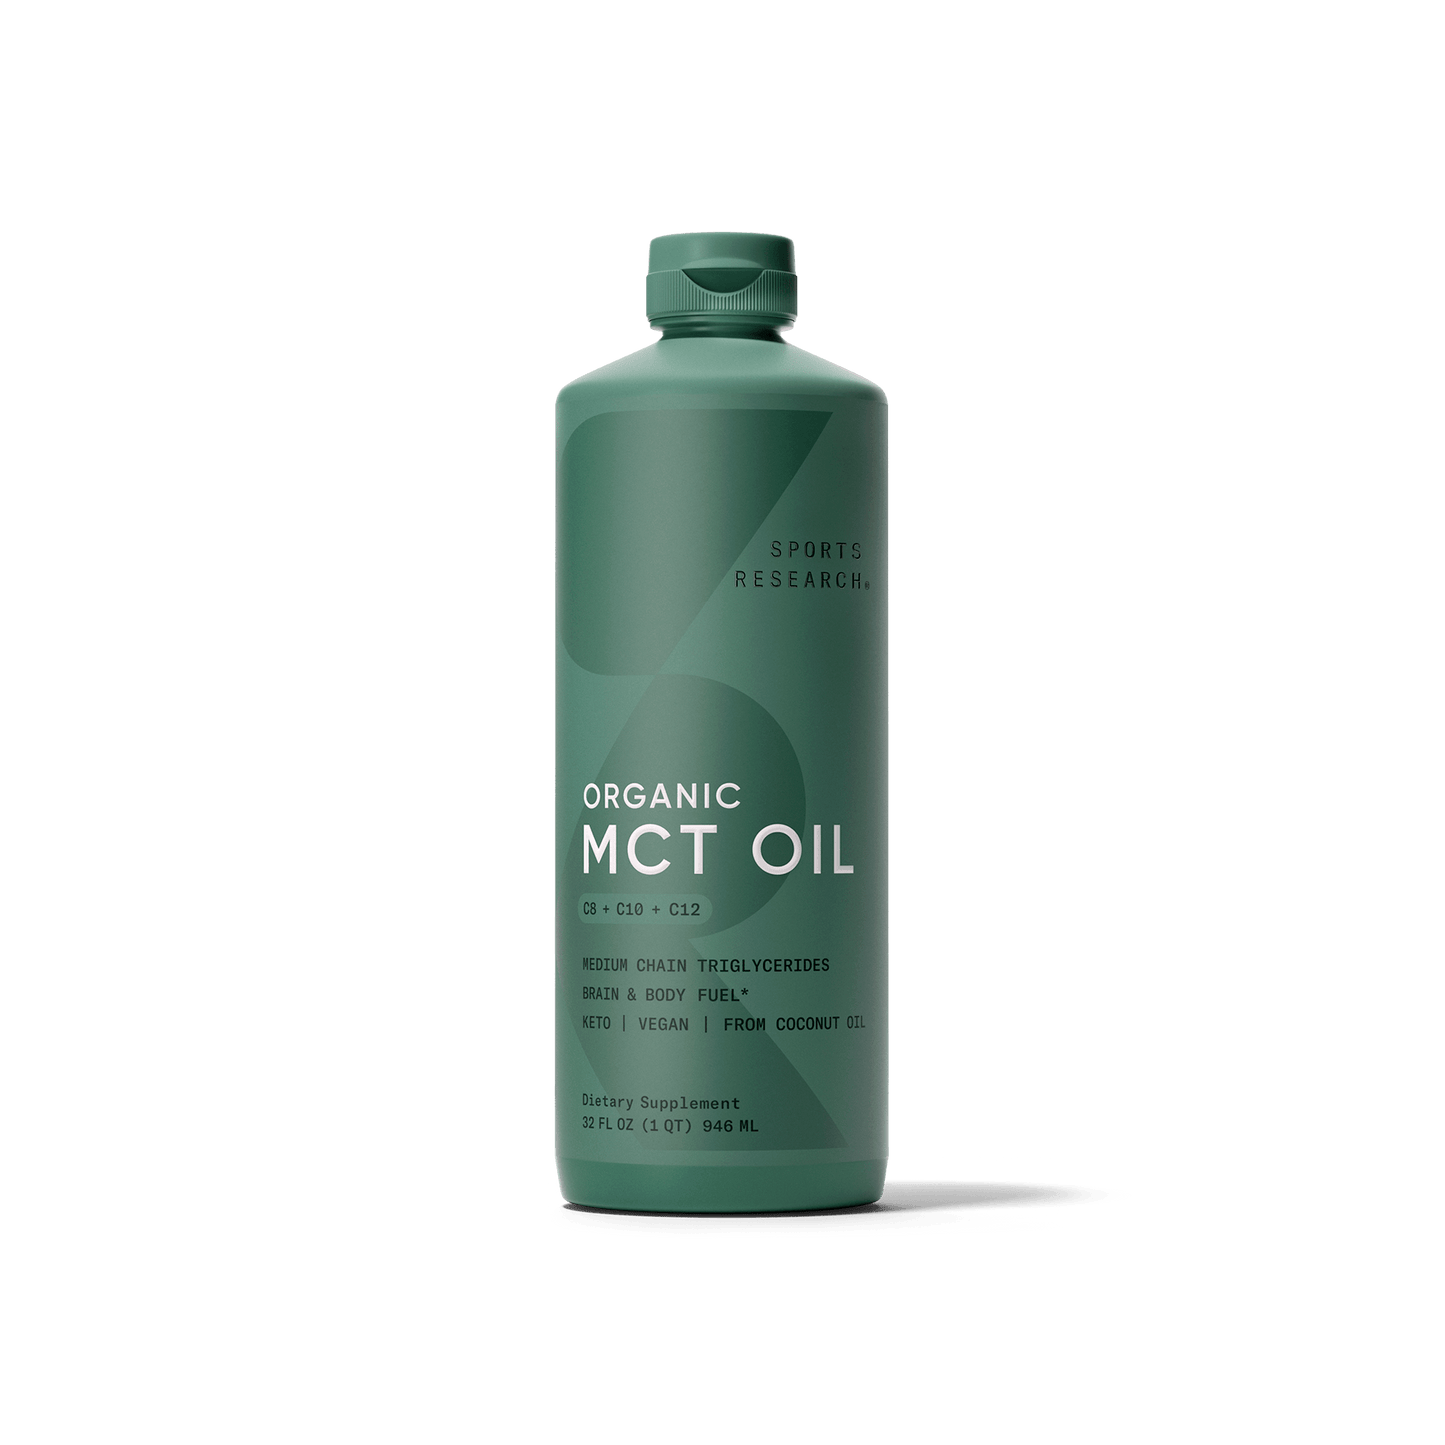 Sports Research Organic MCT Oil Full Spectrum on a green background.